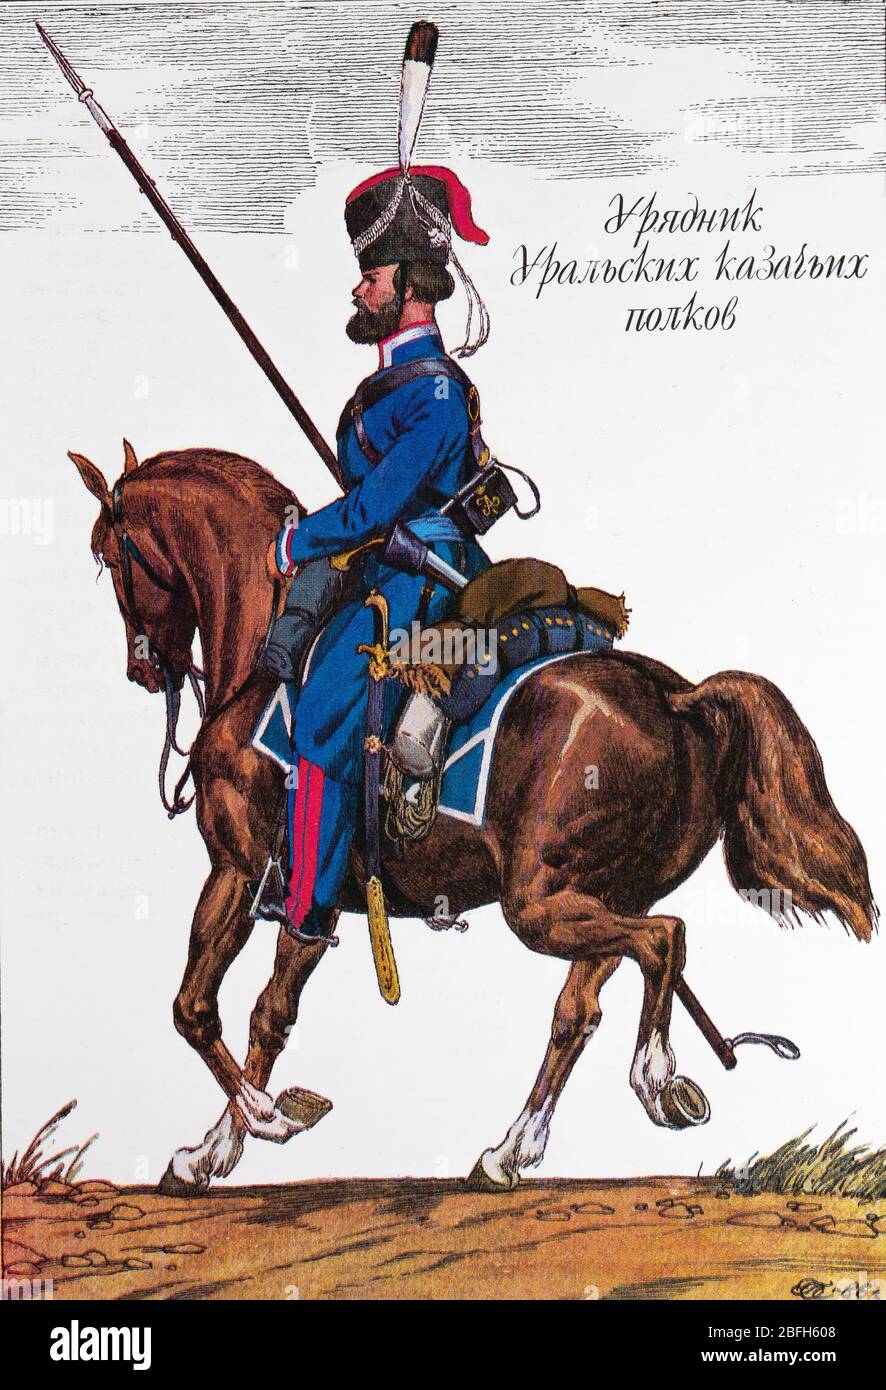 Ural cossack cavalry regiment petty officer, 1812, 19th century Russian army uniform, Russia Stock Photo